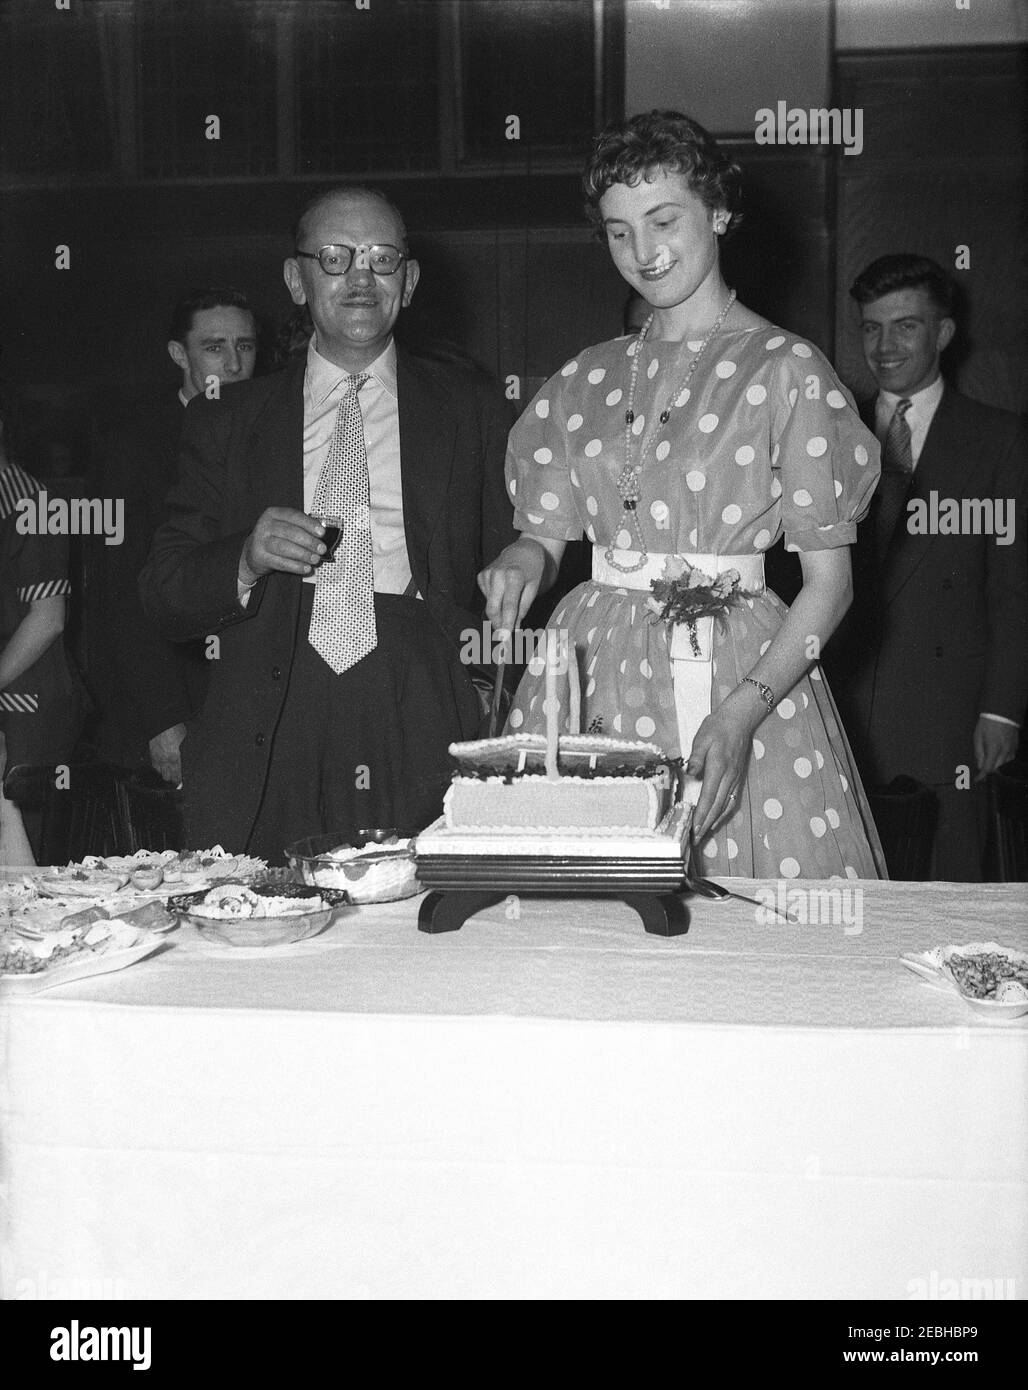 1950s, historical, standing beside her proud grandfather, an elegant young woman wearing a stylish polka dot or spotted dress cutting her birthday cake at her birthday party in a function room of a hotel, England, UK. Stock Photo